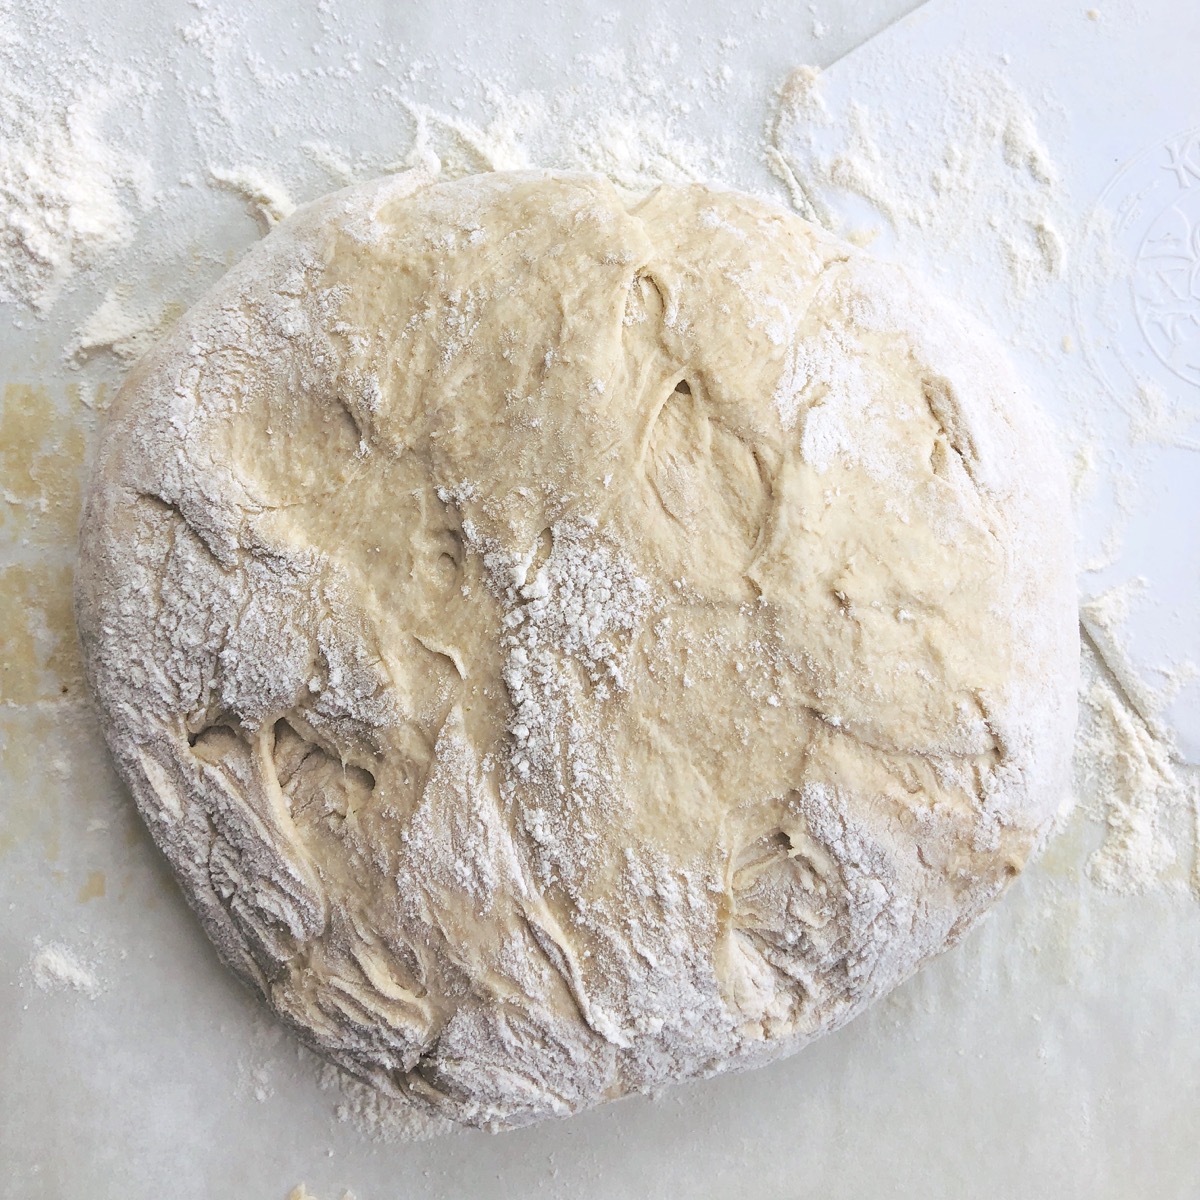 Sticky dough formed into a round ball on a floured work surface.